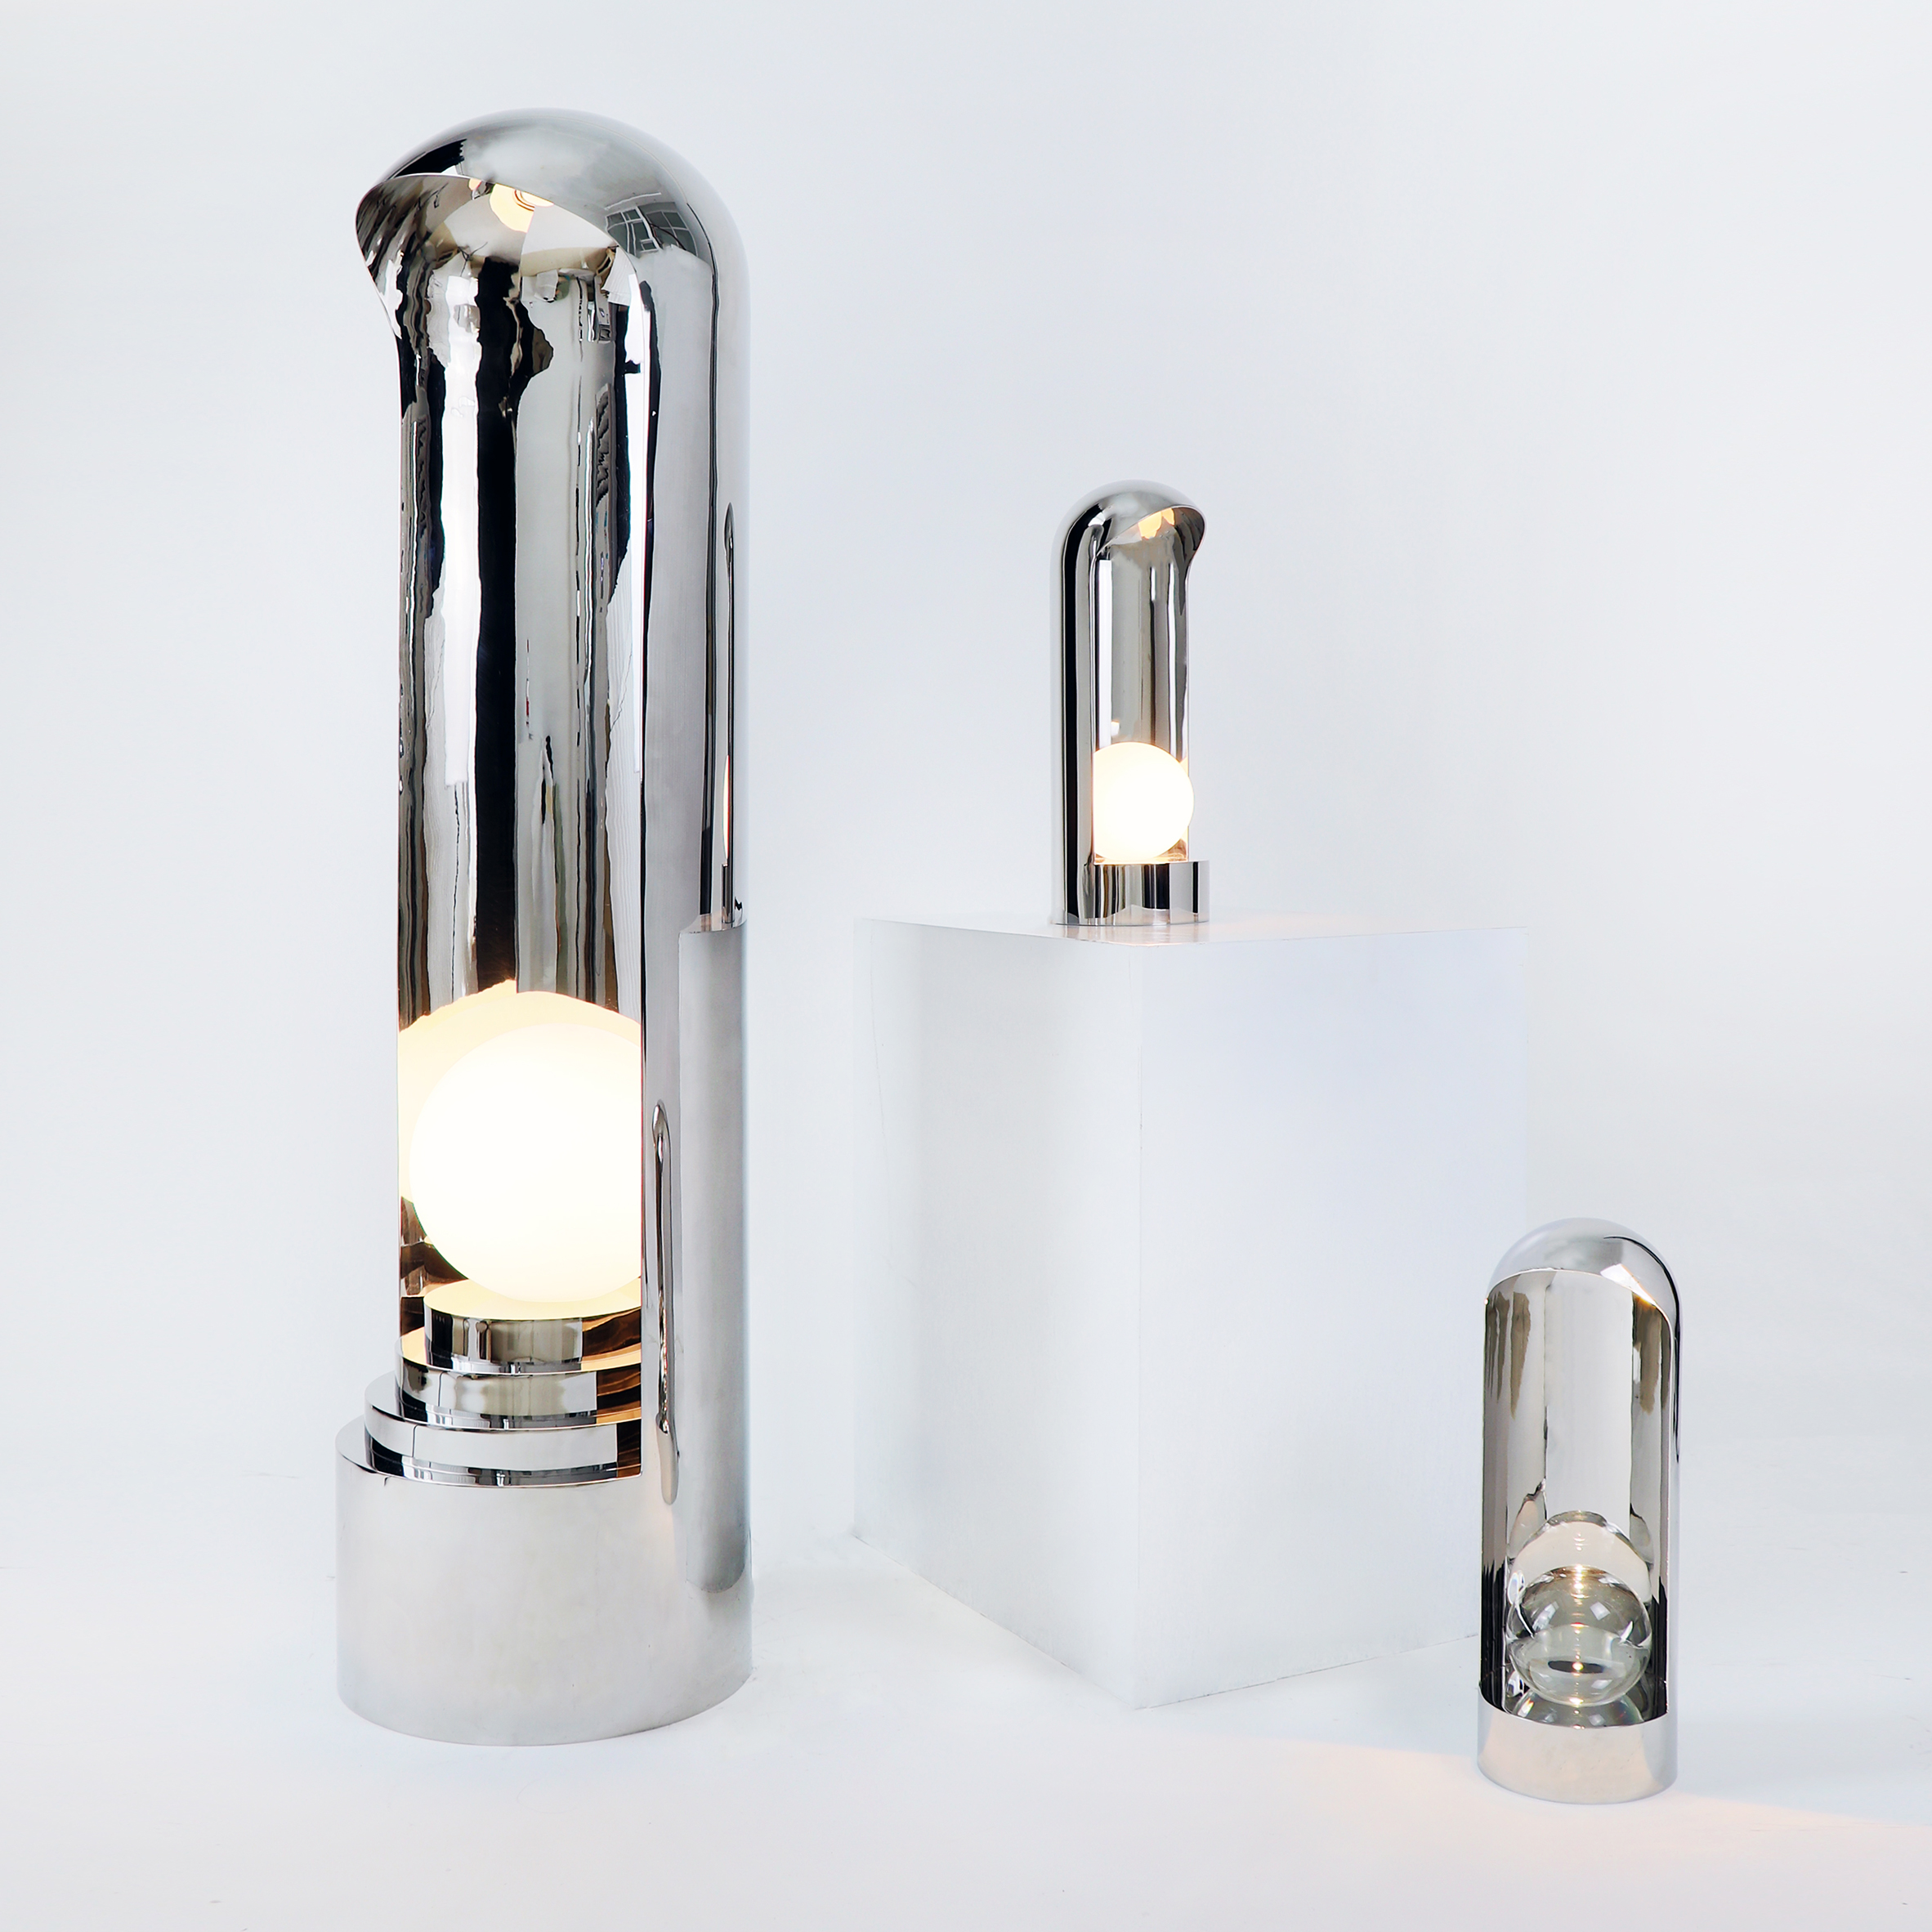 Sanctuary lighting by The Shaw at Design China Beijing 2019